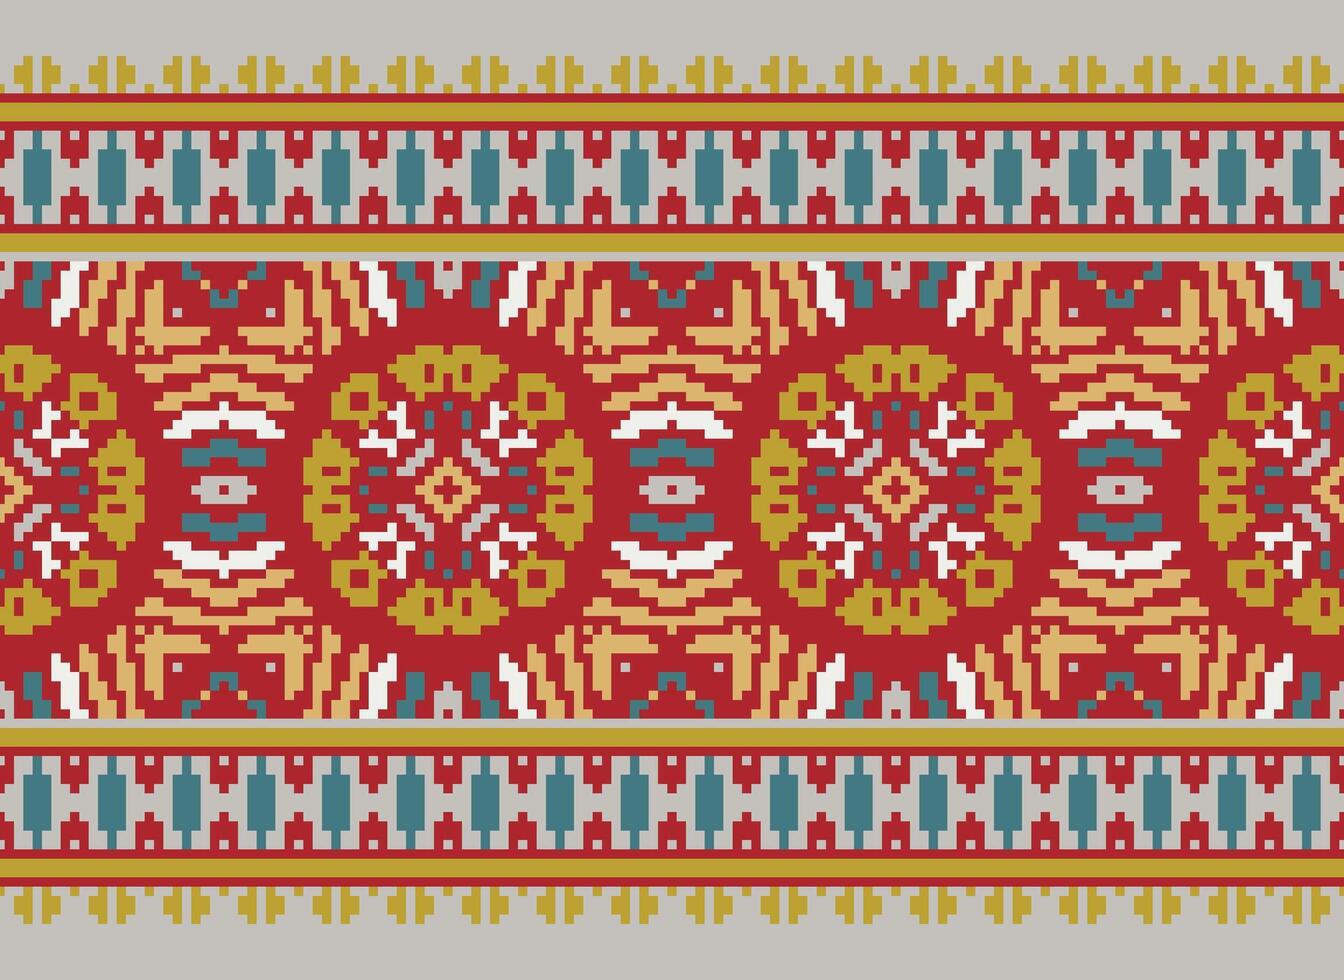 flower embroidery on brown background. ikat and cross stitch geometric seamless pattern ethnic oriental traditional. Aztec style illustration design for carpet, wallpaper, clothing, wrapping, batik. vector